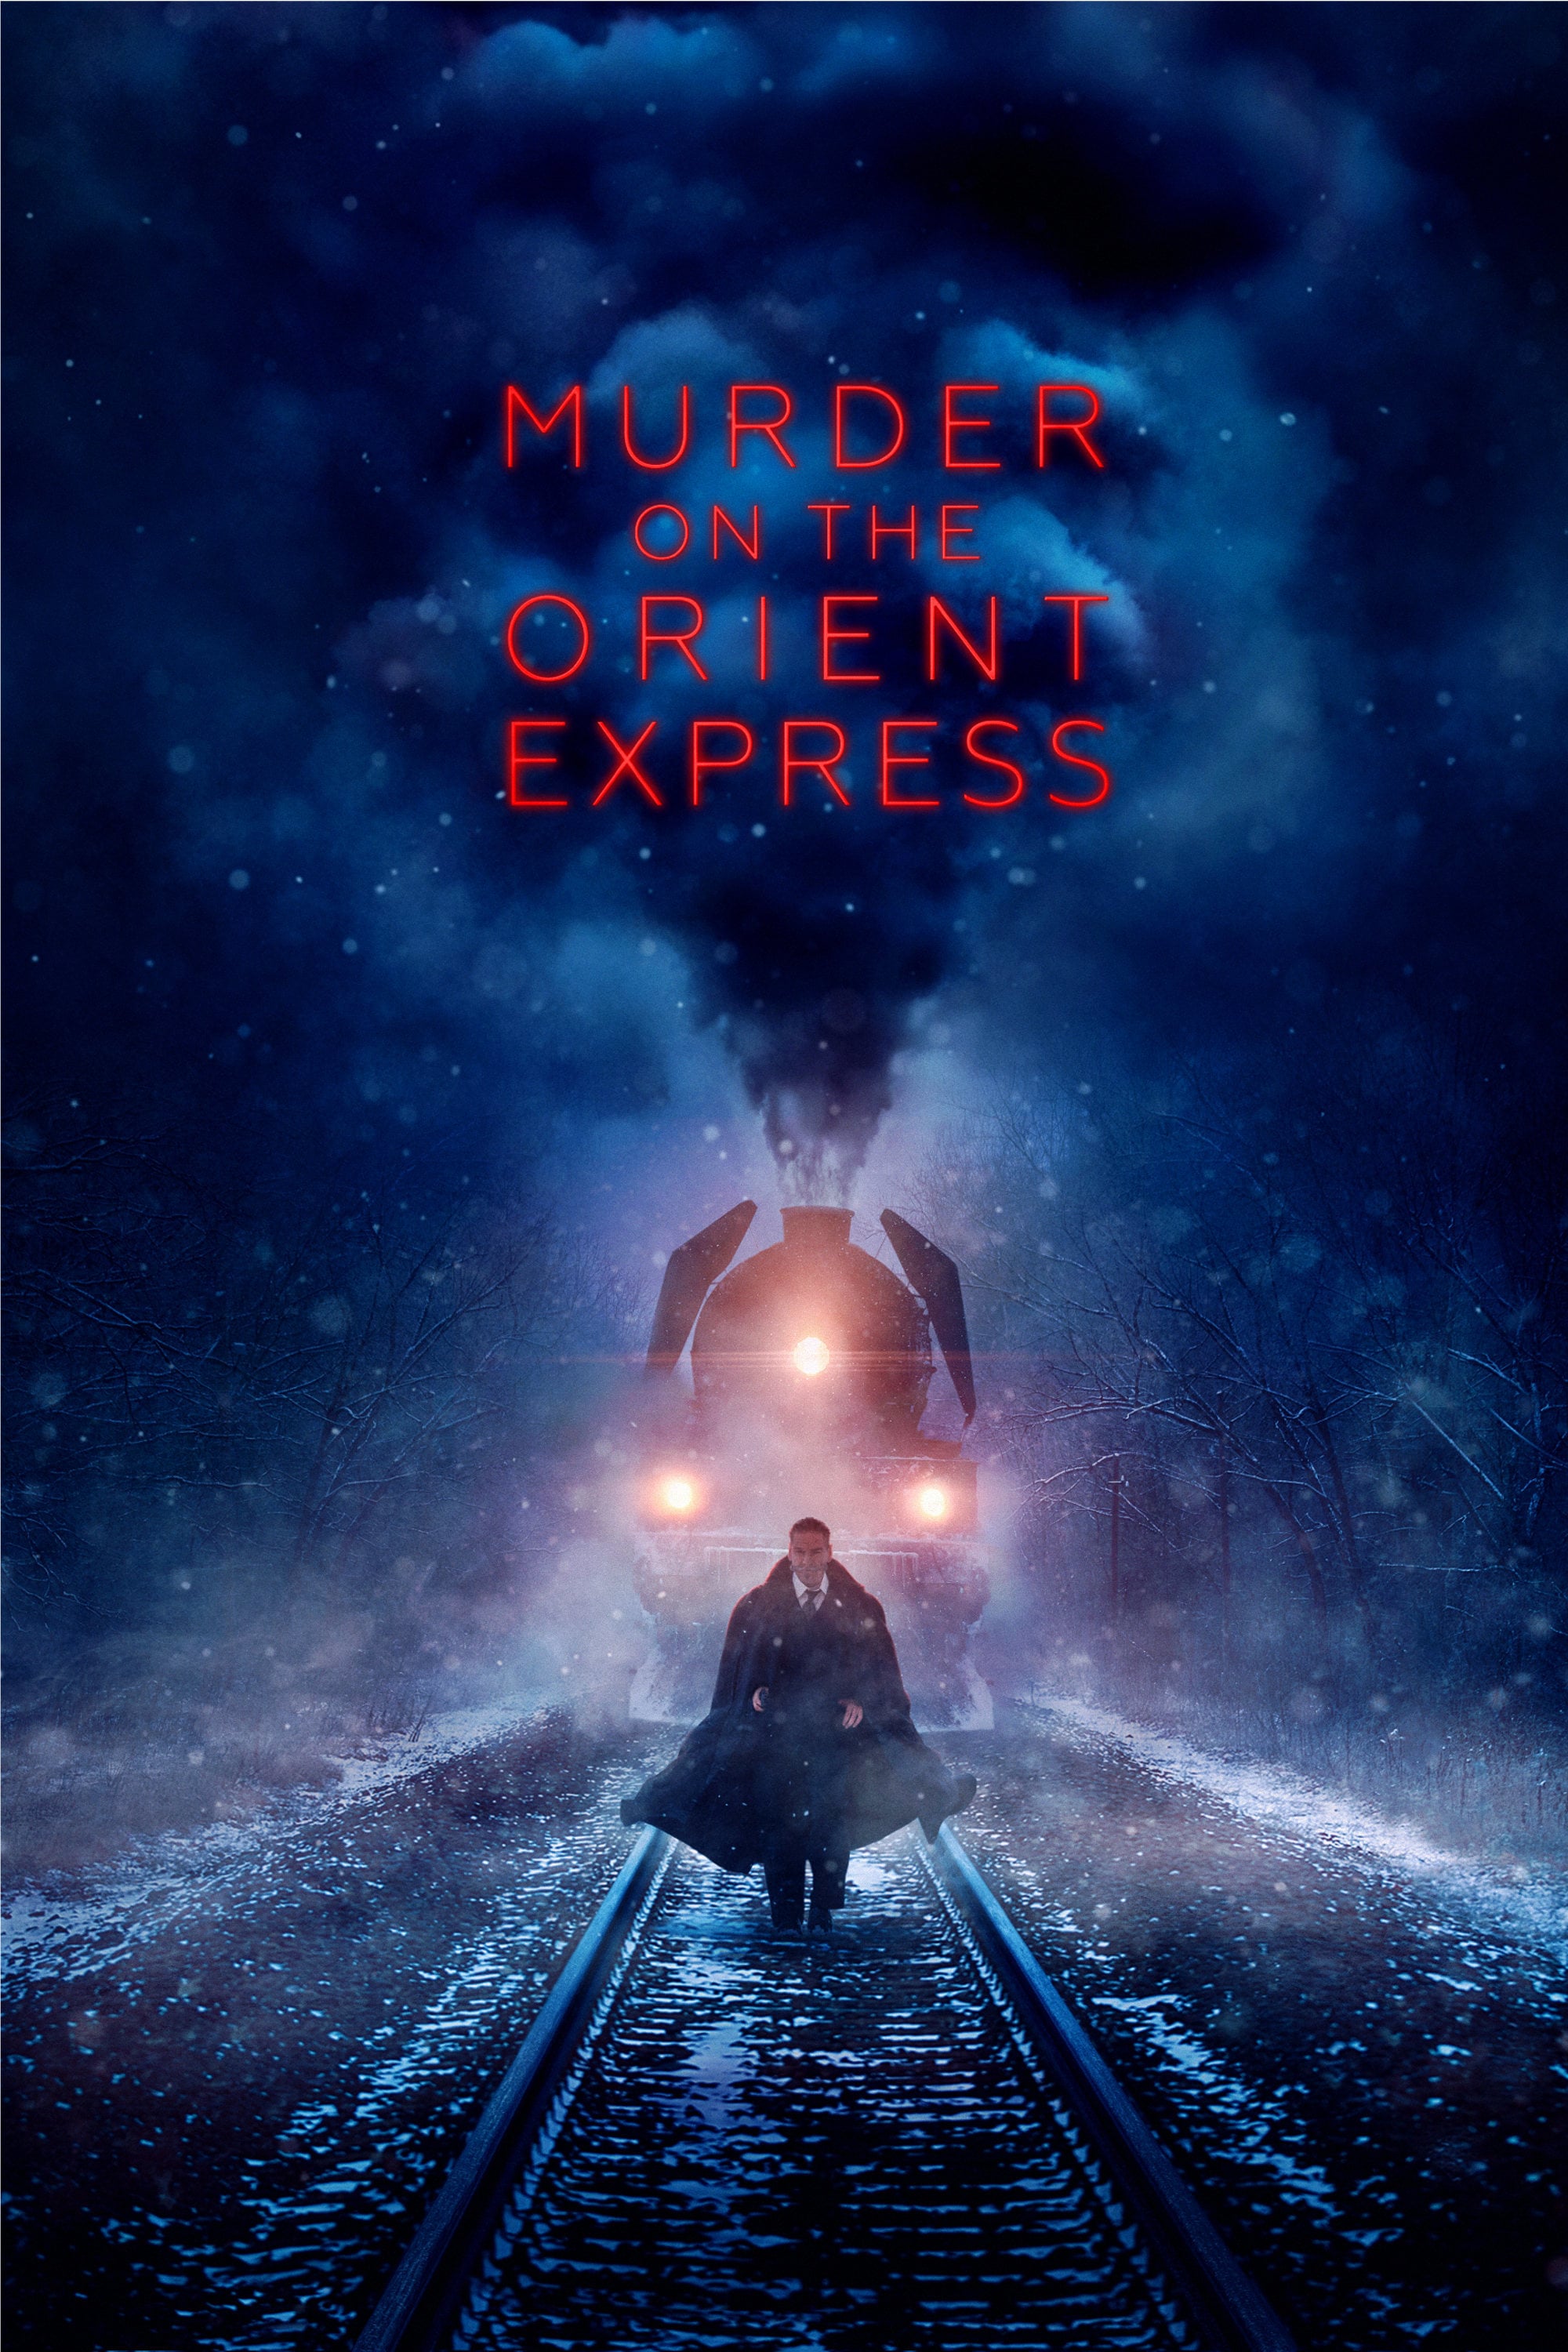 Murder on the orient express gallery place